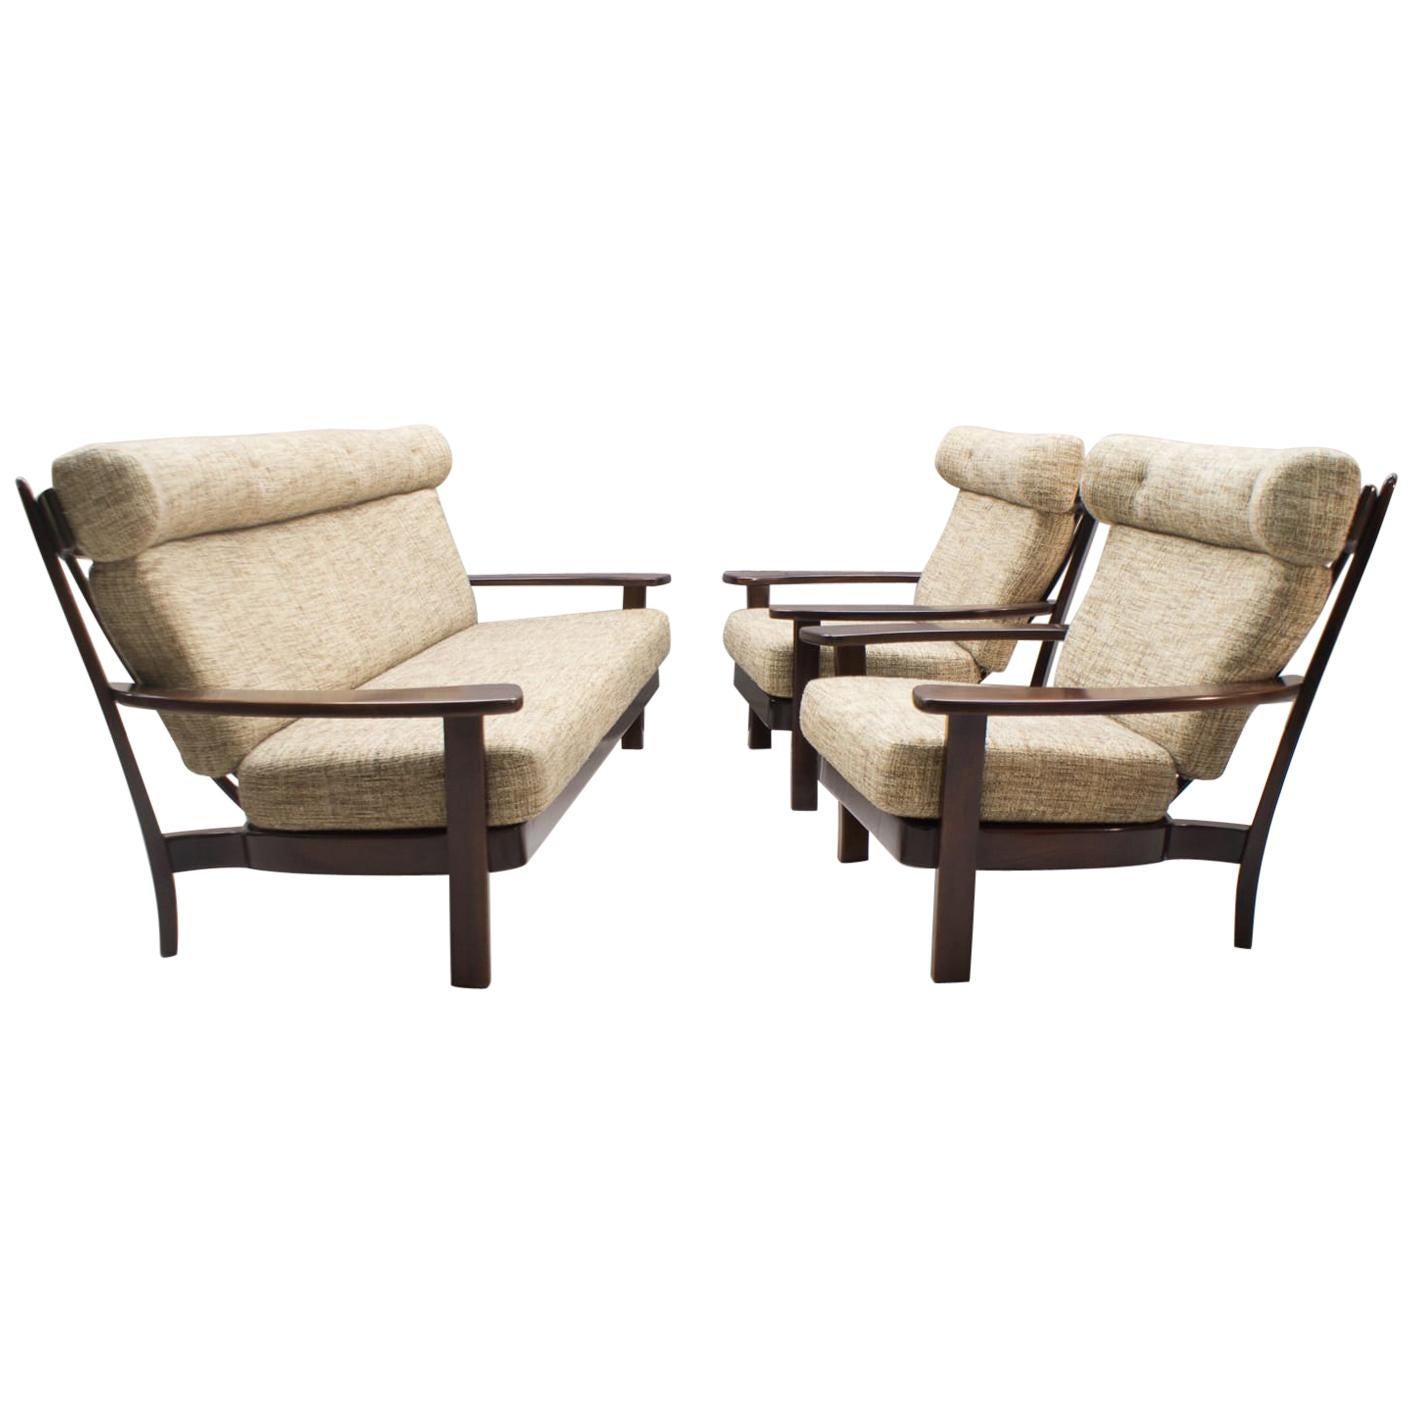 Two Large Brazilian Armchairs in the Manner of Sergio Rodrigues, 1960s For Sale 3